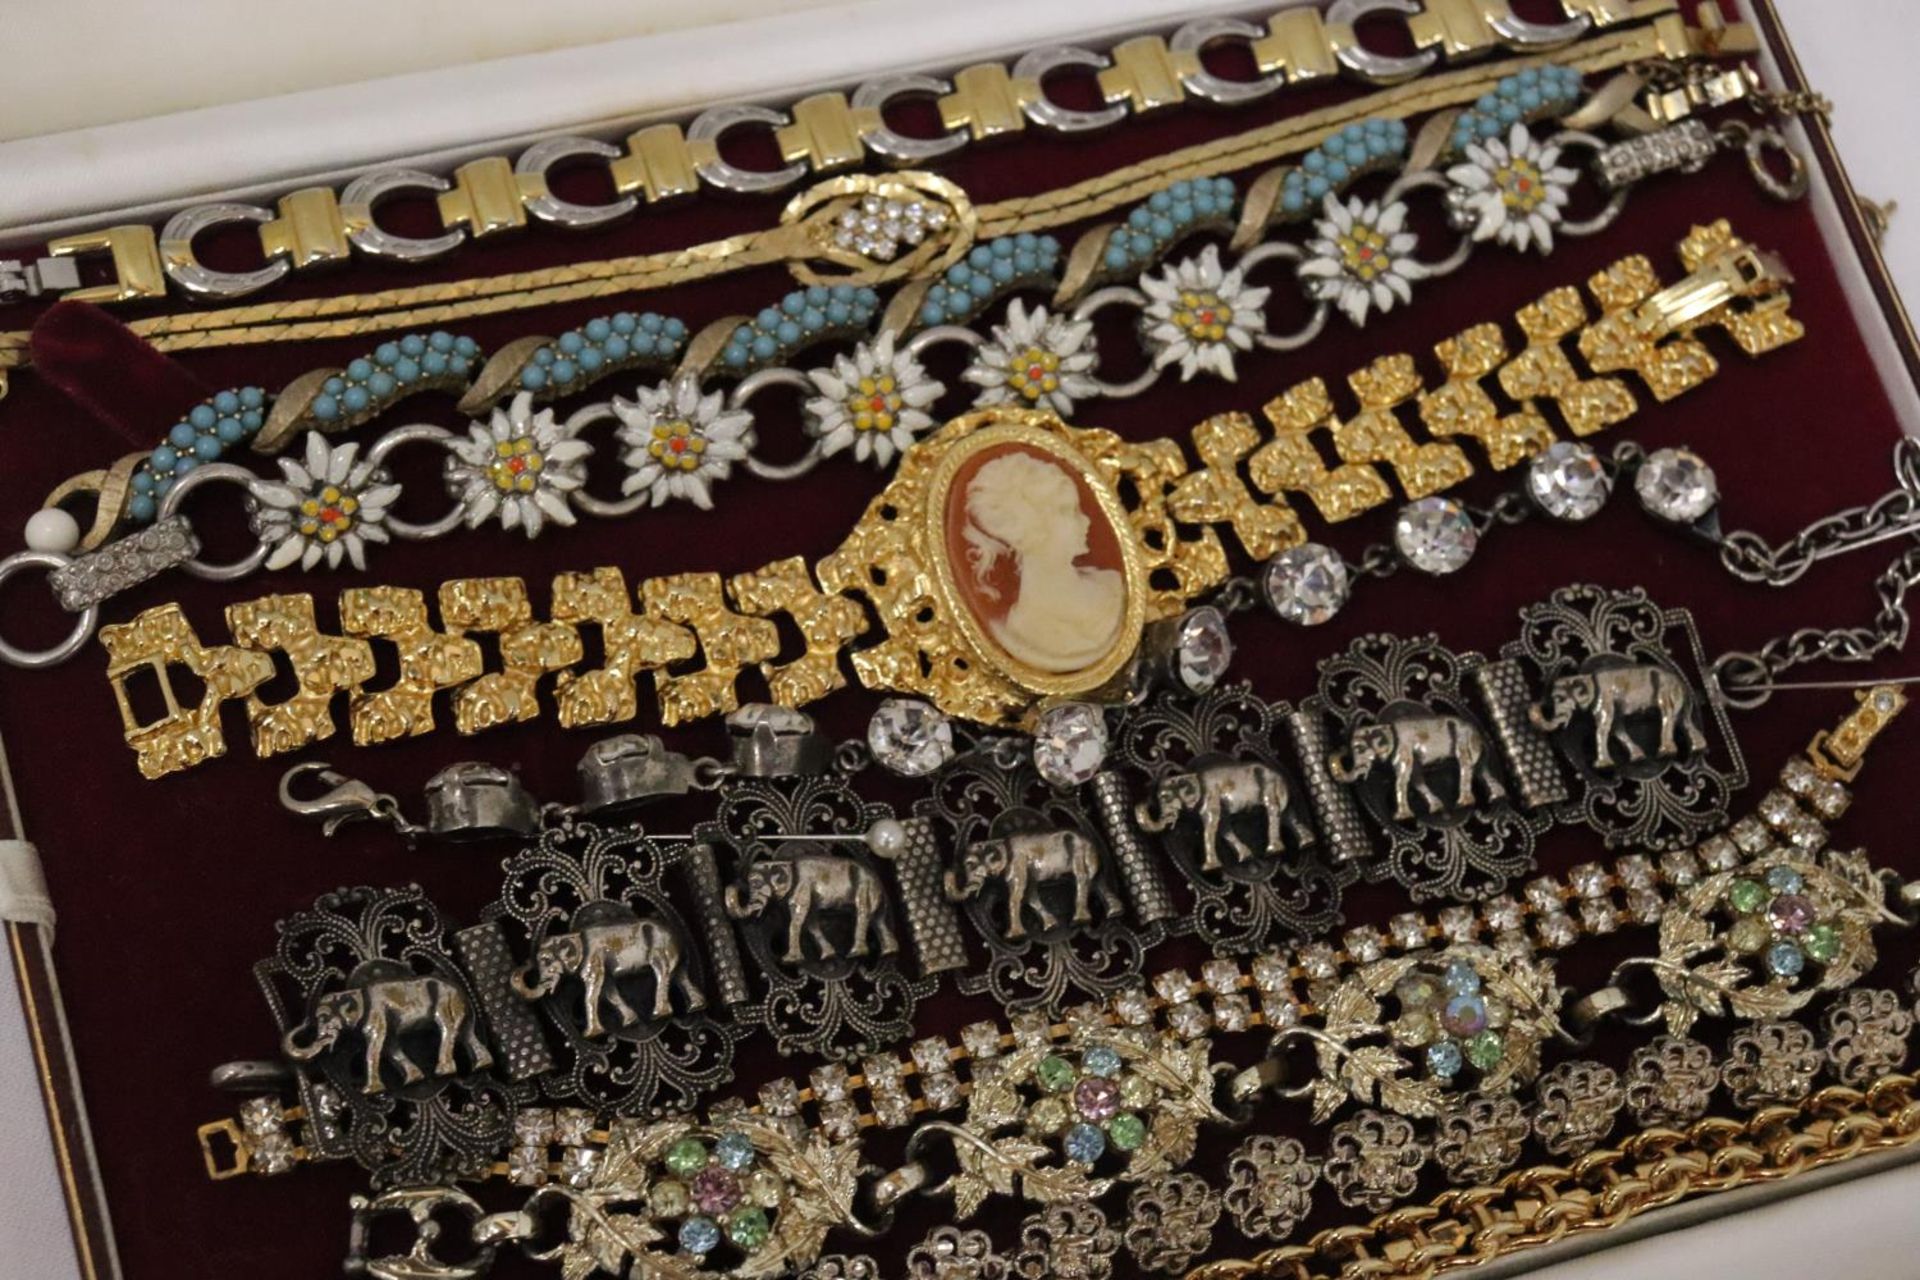 ELEVEN VARIOUS BRACELETS TO INCLUDE JEWELLED, CAMEO, ELEPHANT IN A PRESENTATION BOX - Image 4 of 7